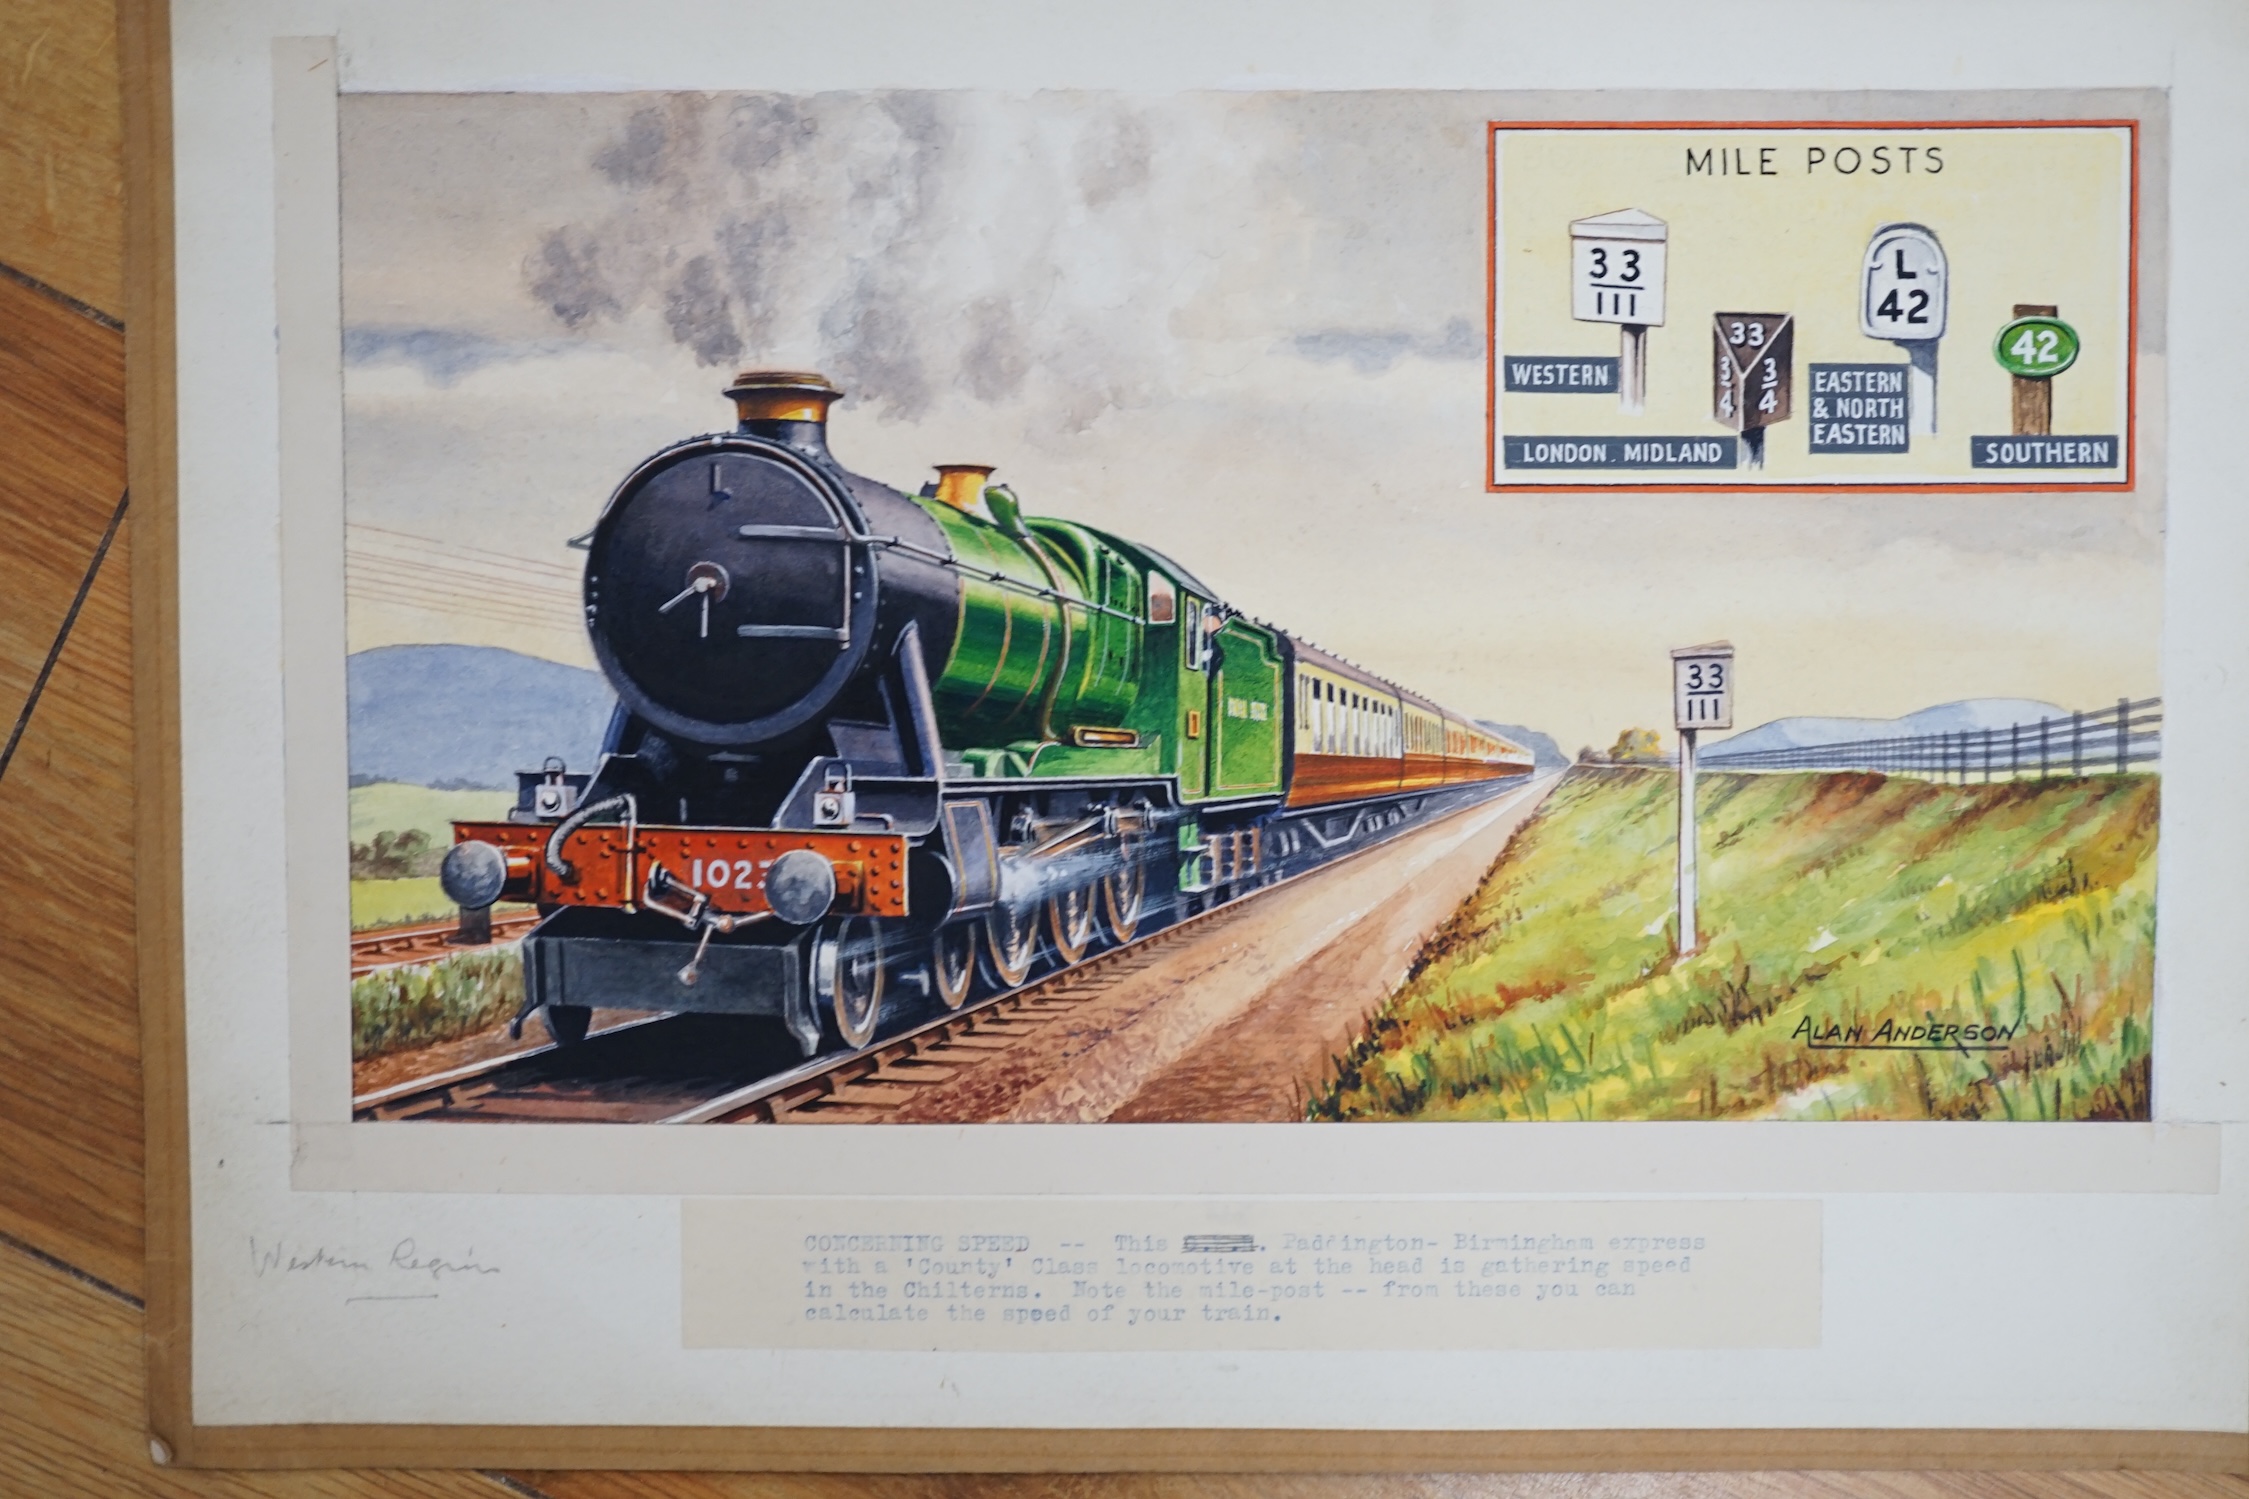 Alan Anderson, two original watercolours for postcard designs, steam locomotives, ‘London, Midland Region Express’ & ‘County Class Express’ signed, unframed, 28 x 38cm. Condition - fair to good